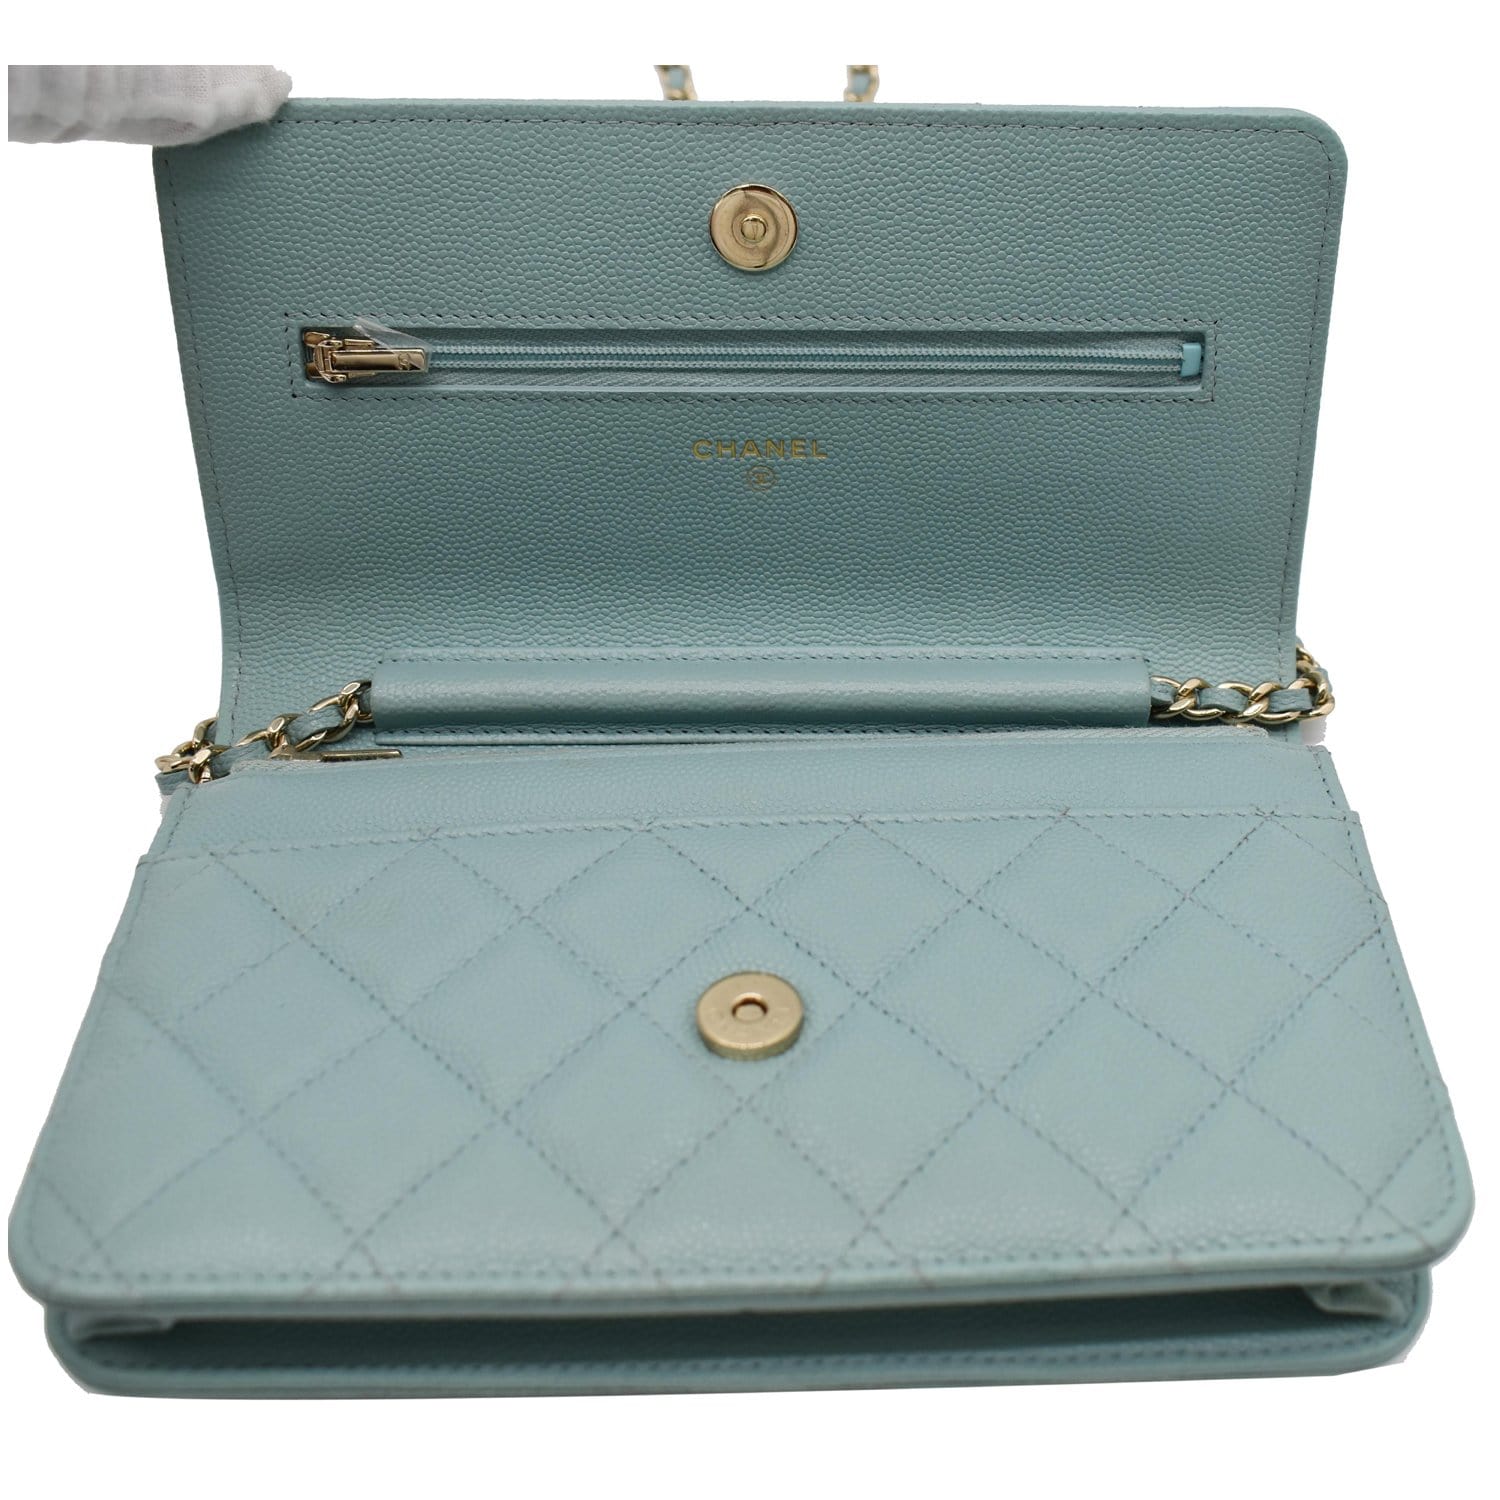 Get the best deals on CHANEL WOC Blue Bags & Handbags for Women